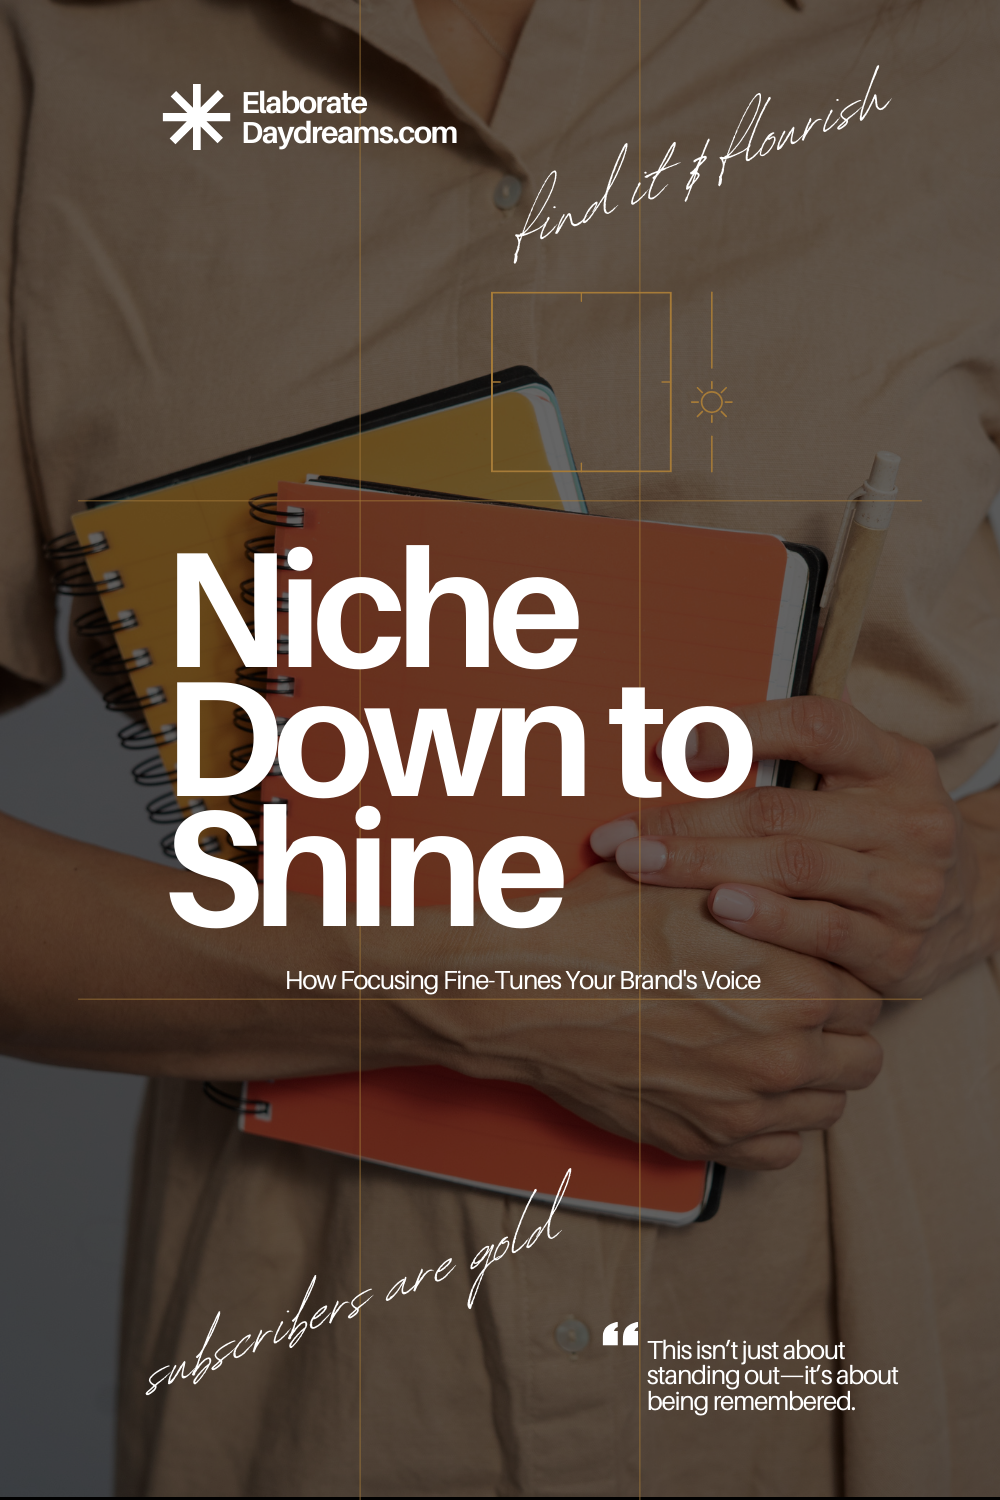 A person holding several notebooks and a pen in front of their chest. The text overlay reads: "ElaborateDaydreams.com" at the top with the tagline "Find it & Flourish." Main Title: "Niche Down to Shine: How Focusing Fine-Tunes Your Brand's Voice." Additional text elements include "subscribers are gold" and a quote at the bottom right: "This isn’t just about standing out—it’s about being remembered."